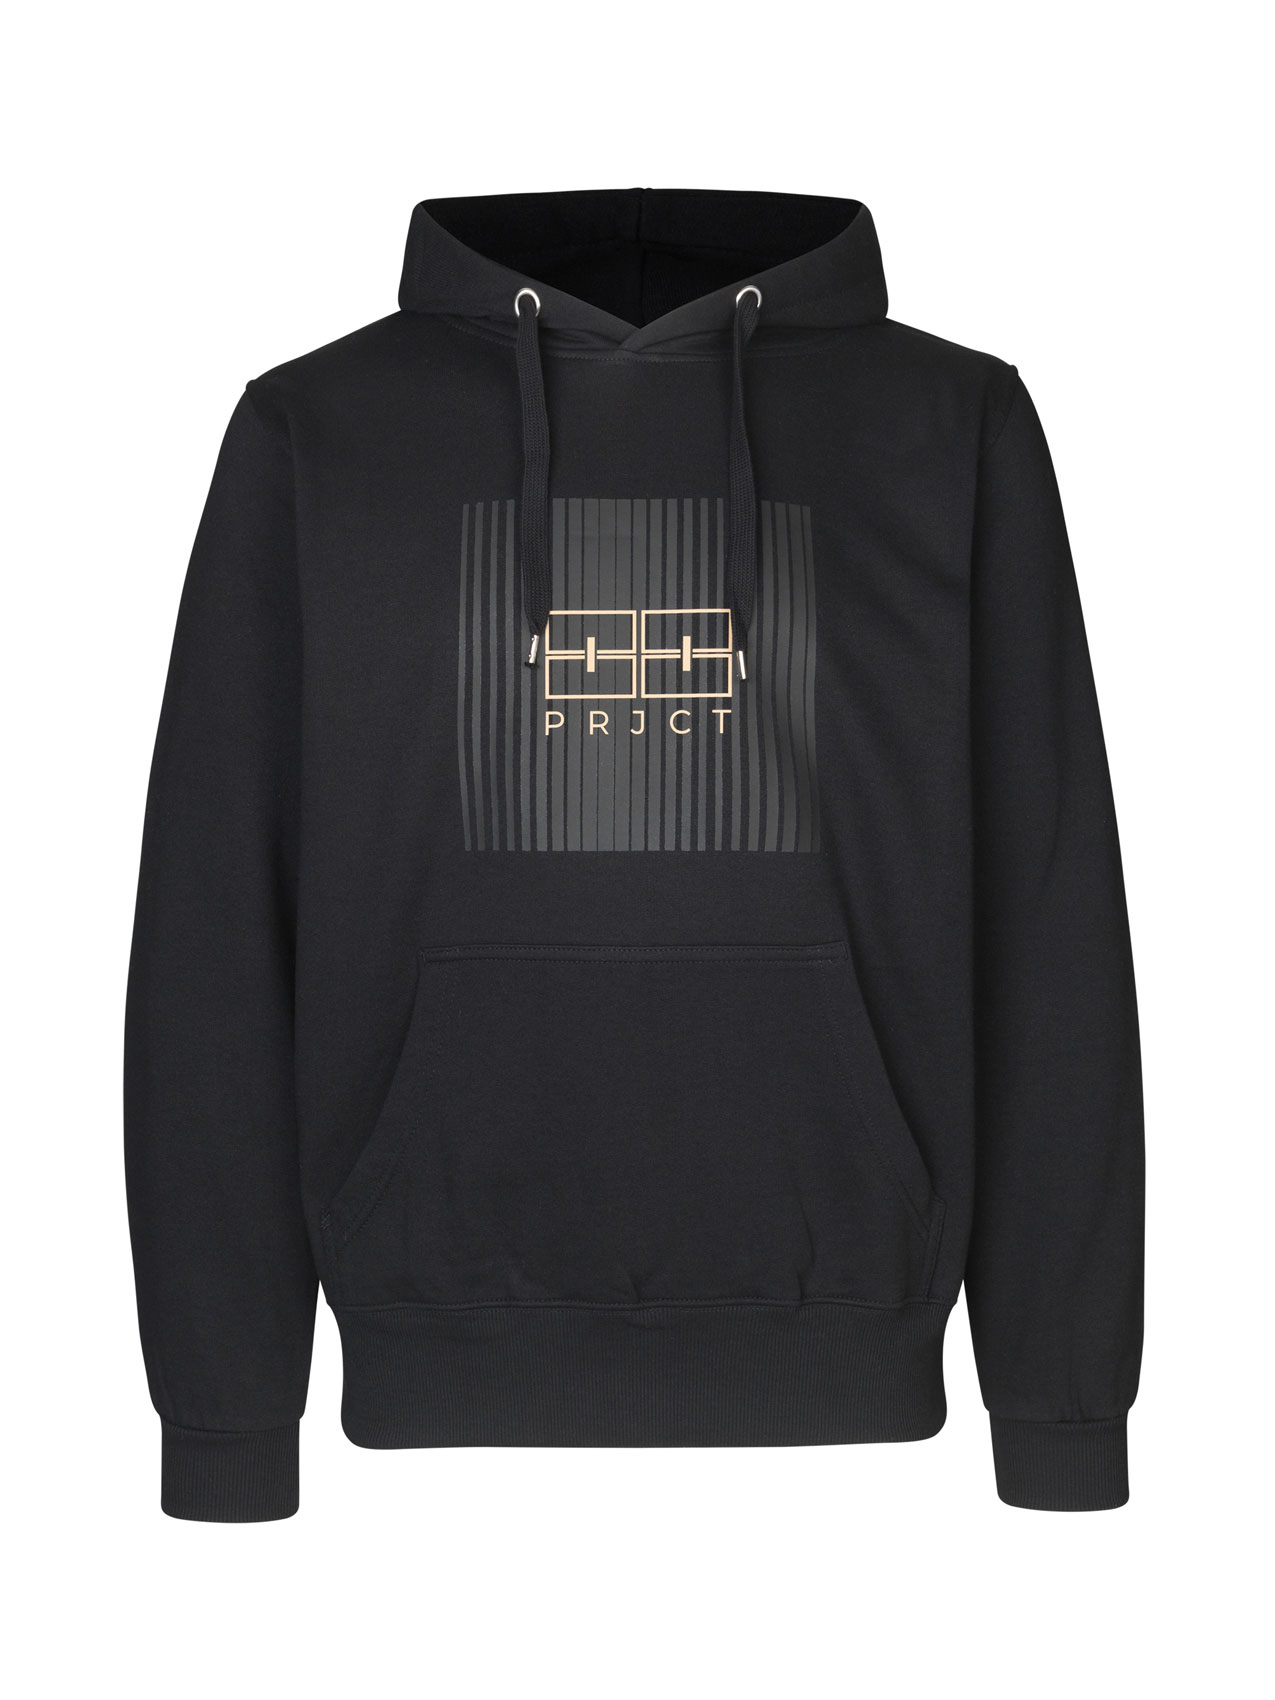 ‘FOR LIVET BROR’ HOODIE WITH FRONT BOX LOGO - BLACK – 88PRJCT – Streetwear